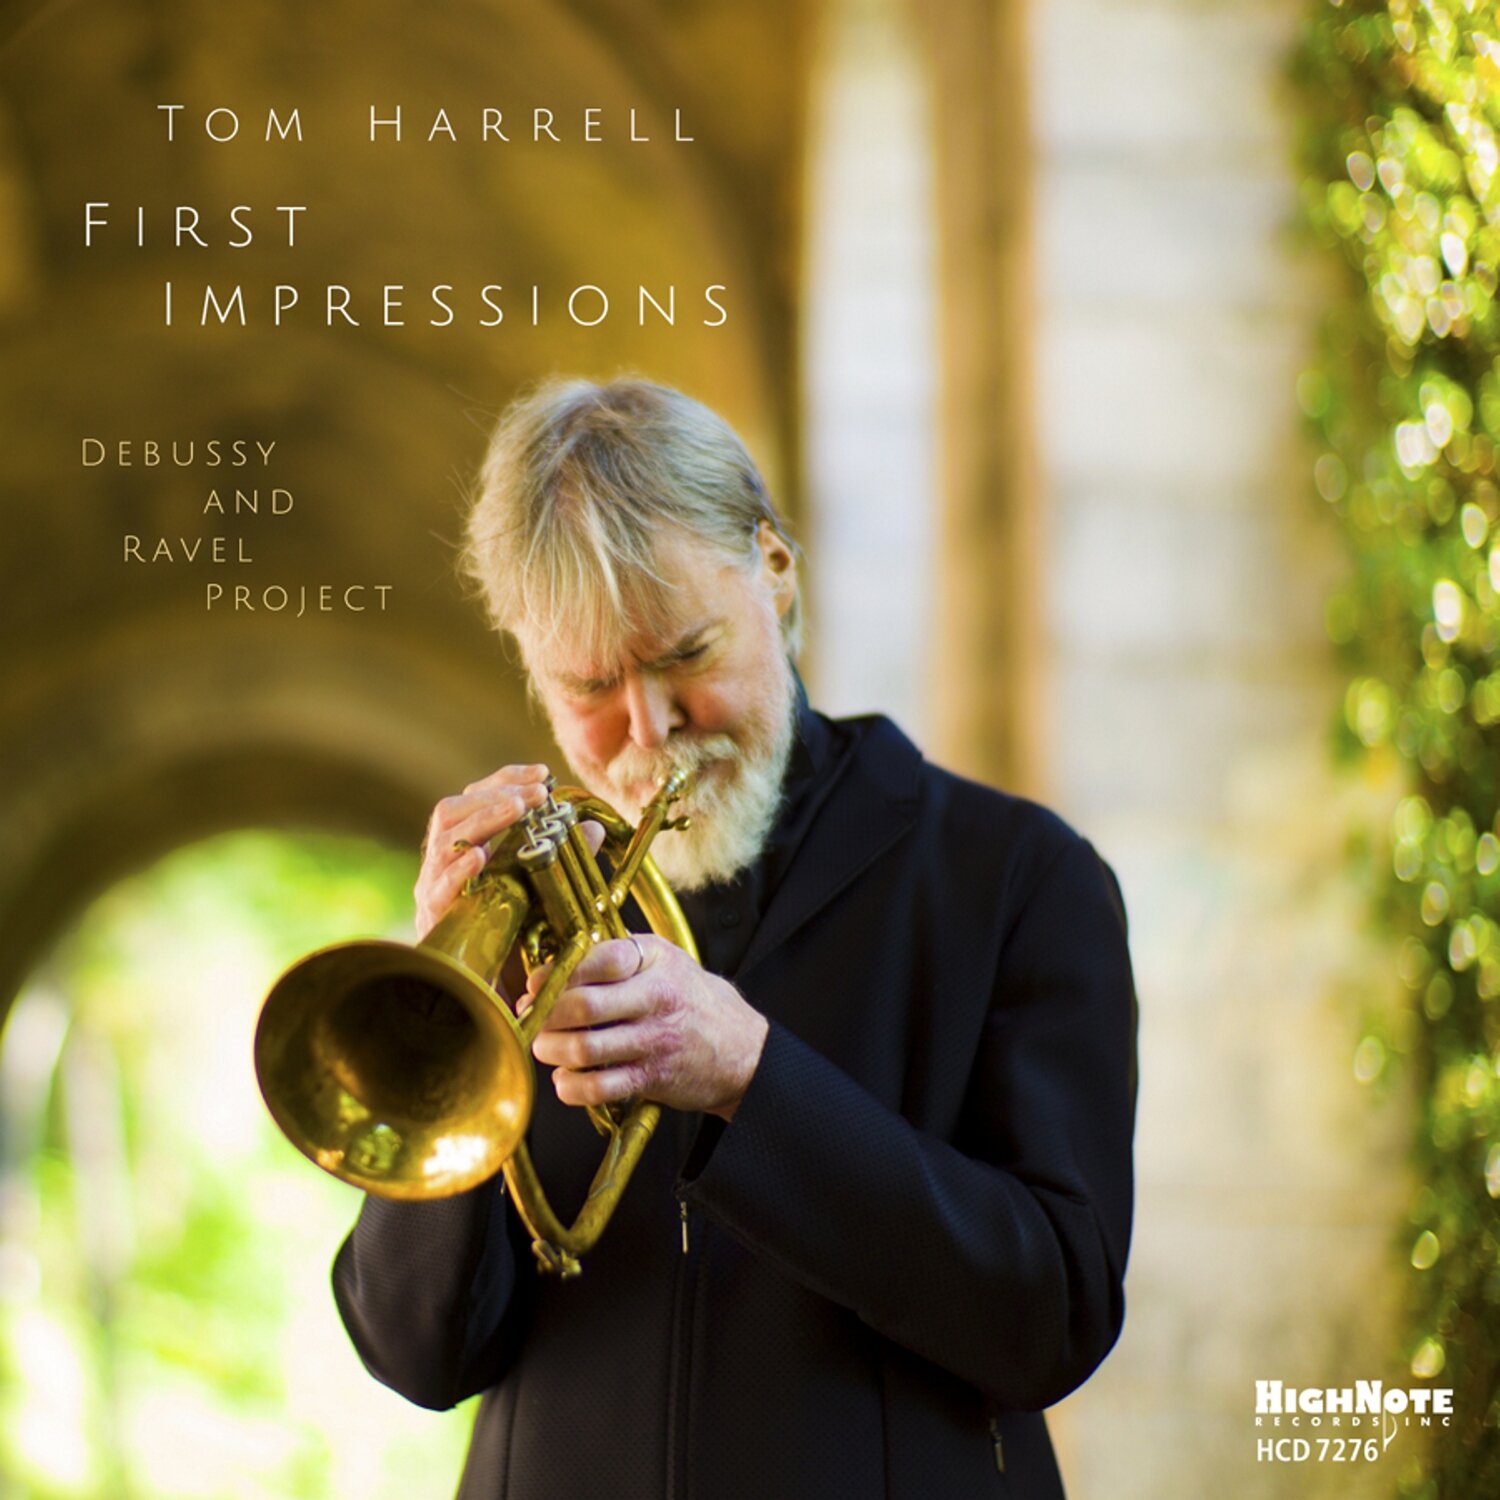 TOM HARRELL - First Impressions, Debussy And Ravel Project